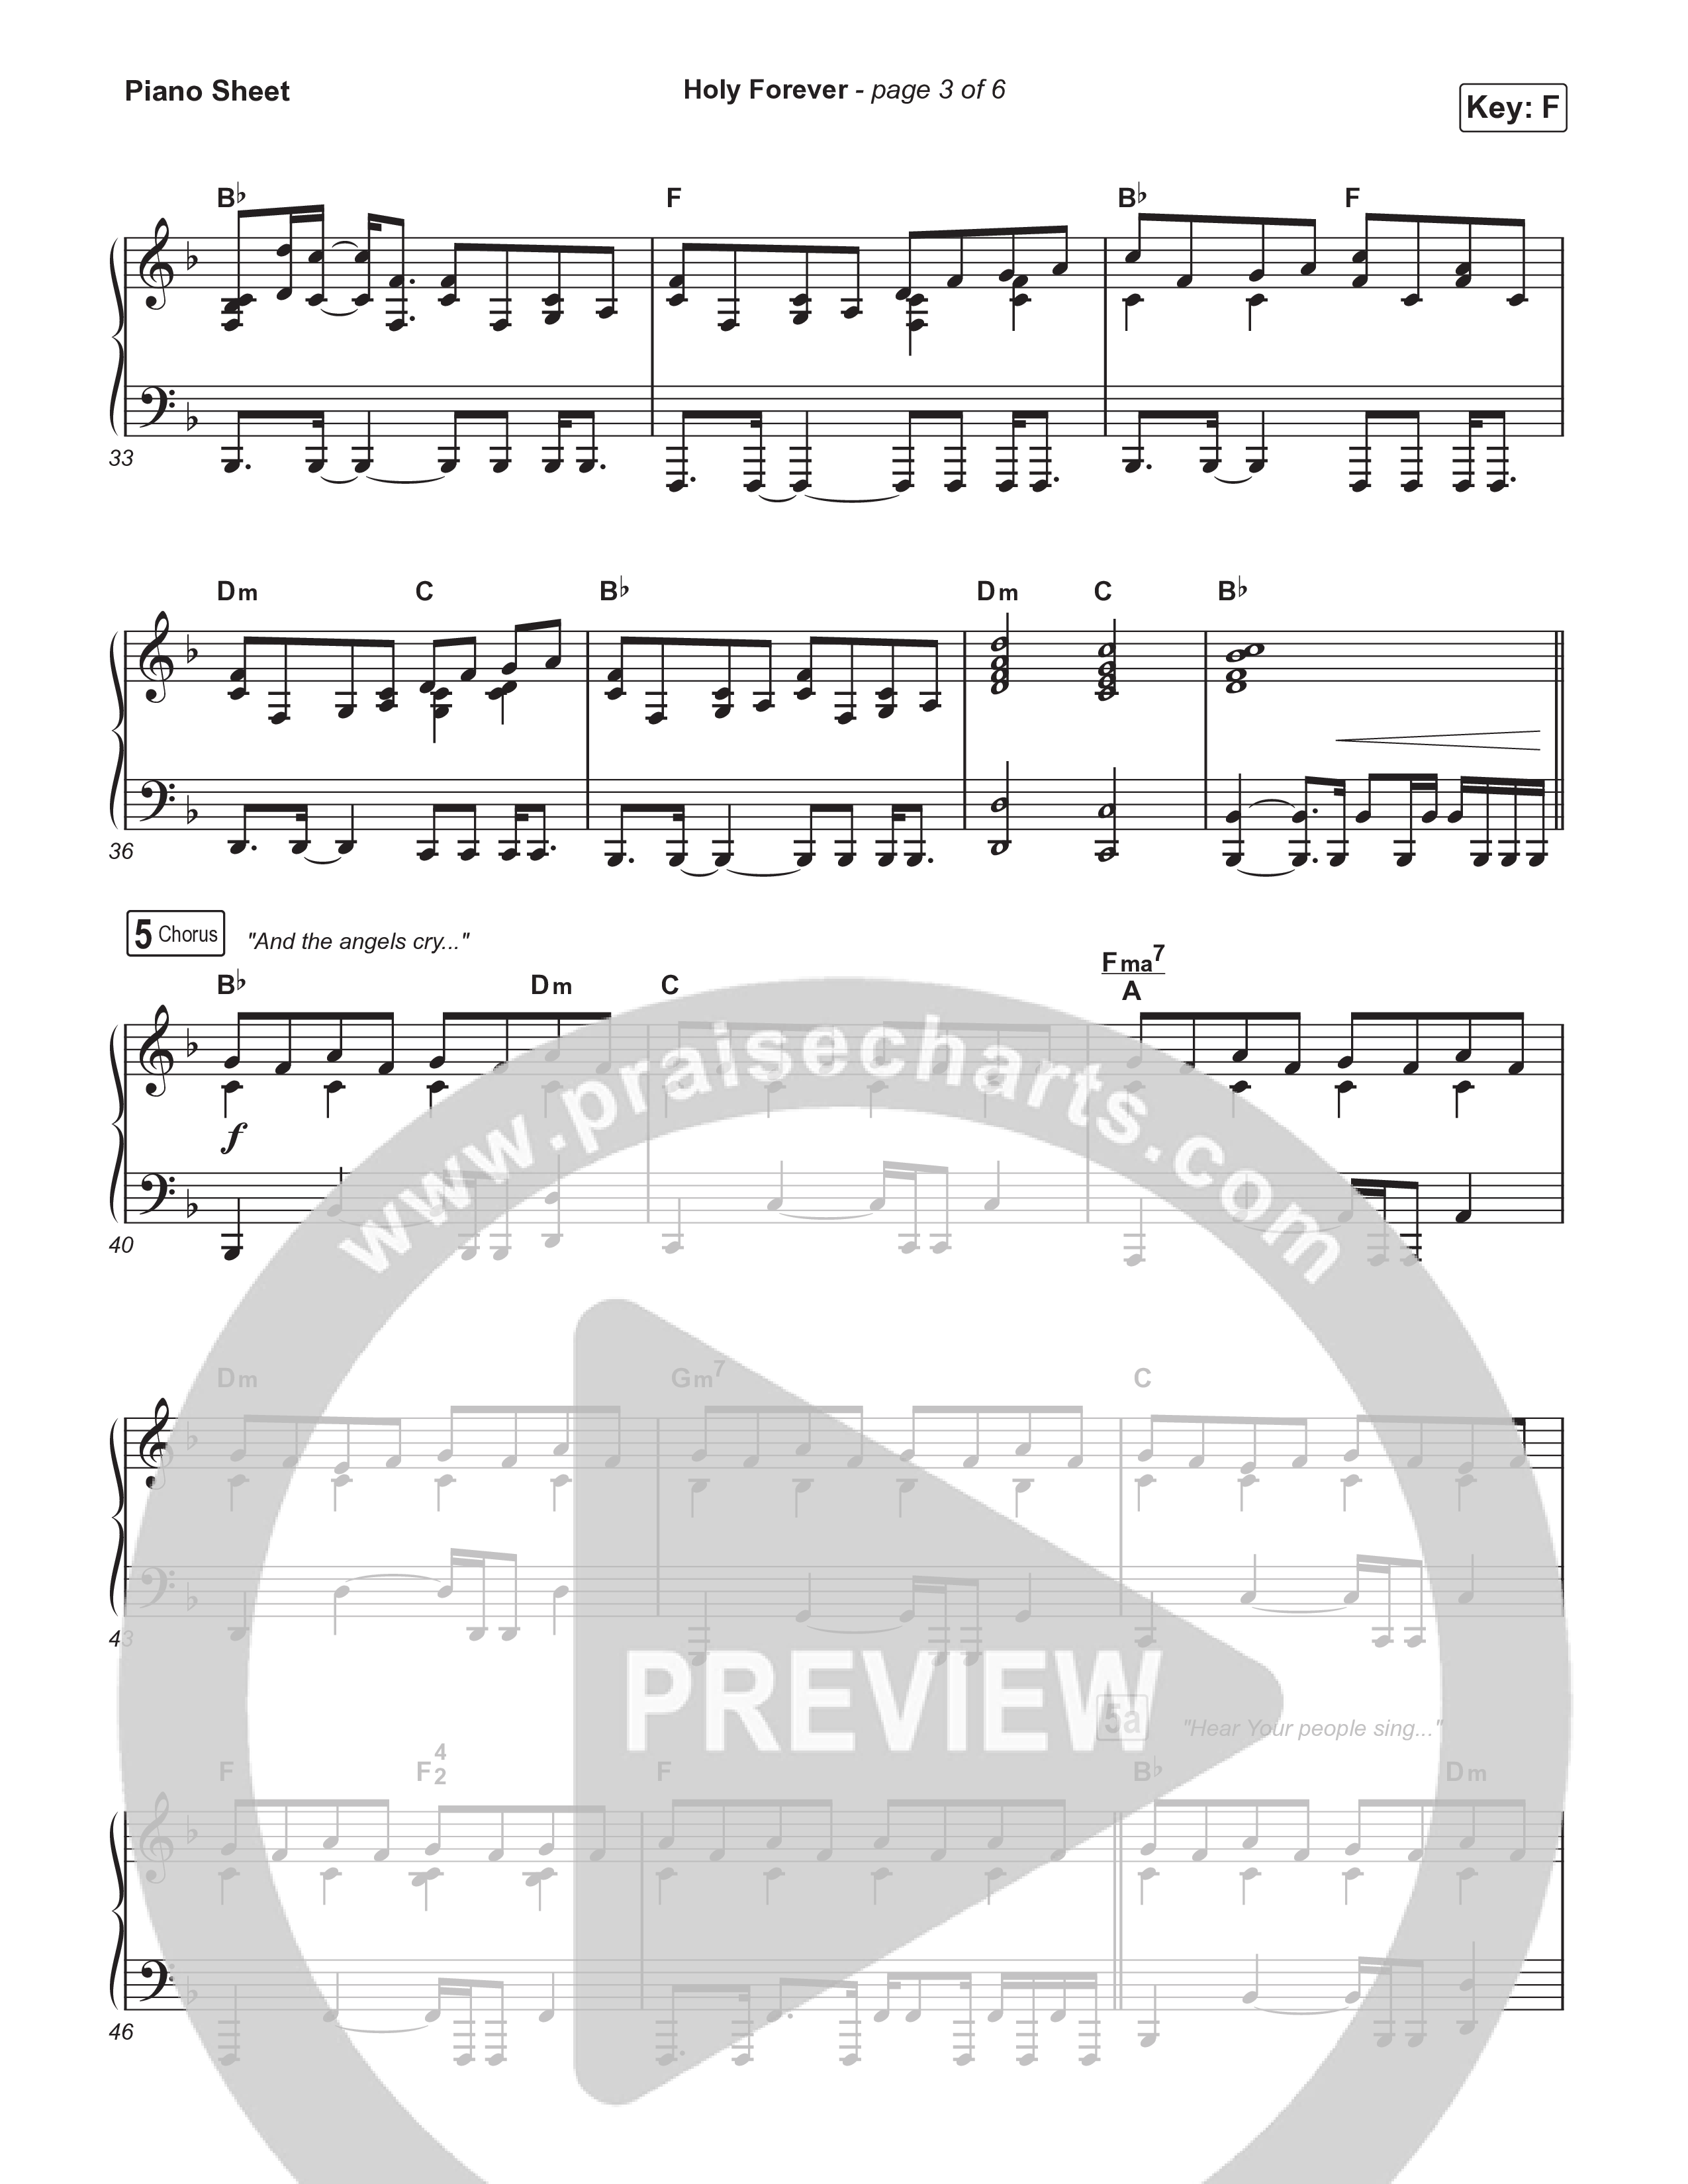 Holy Forever (Live) Piano Sheet (Bethel Music)